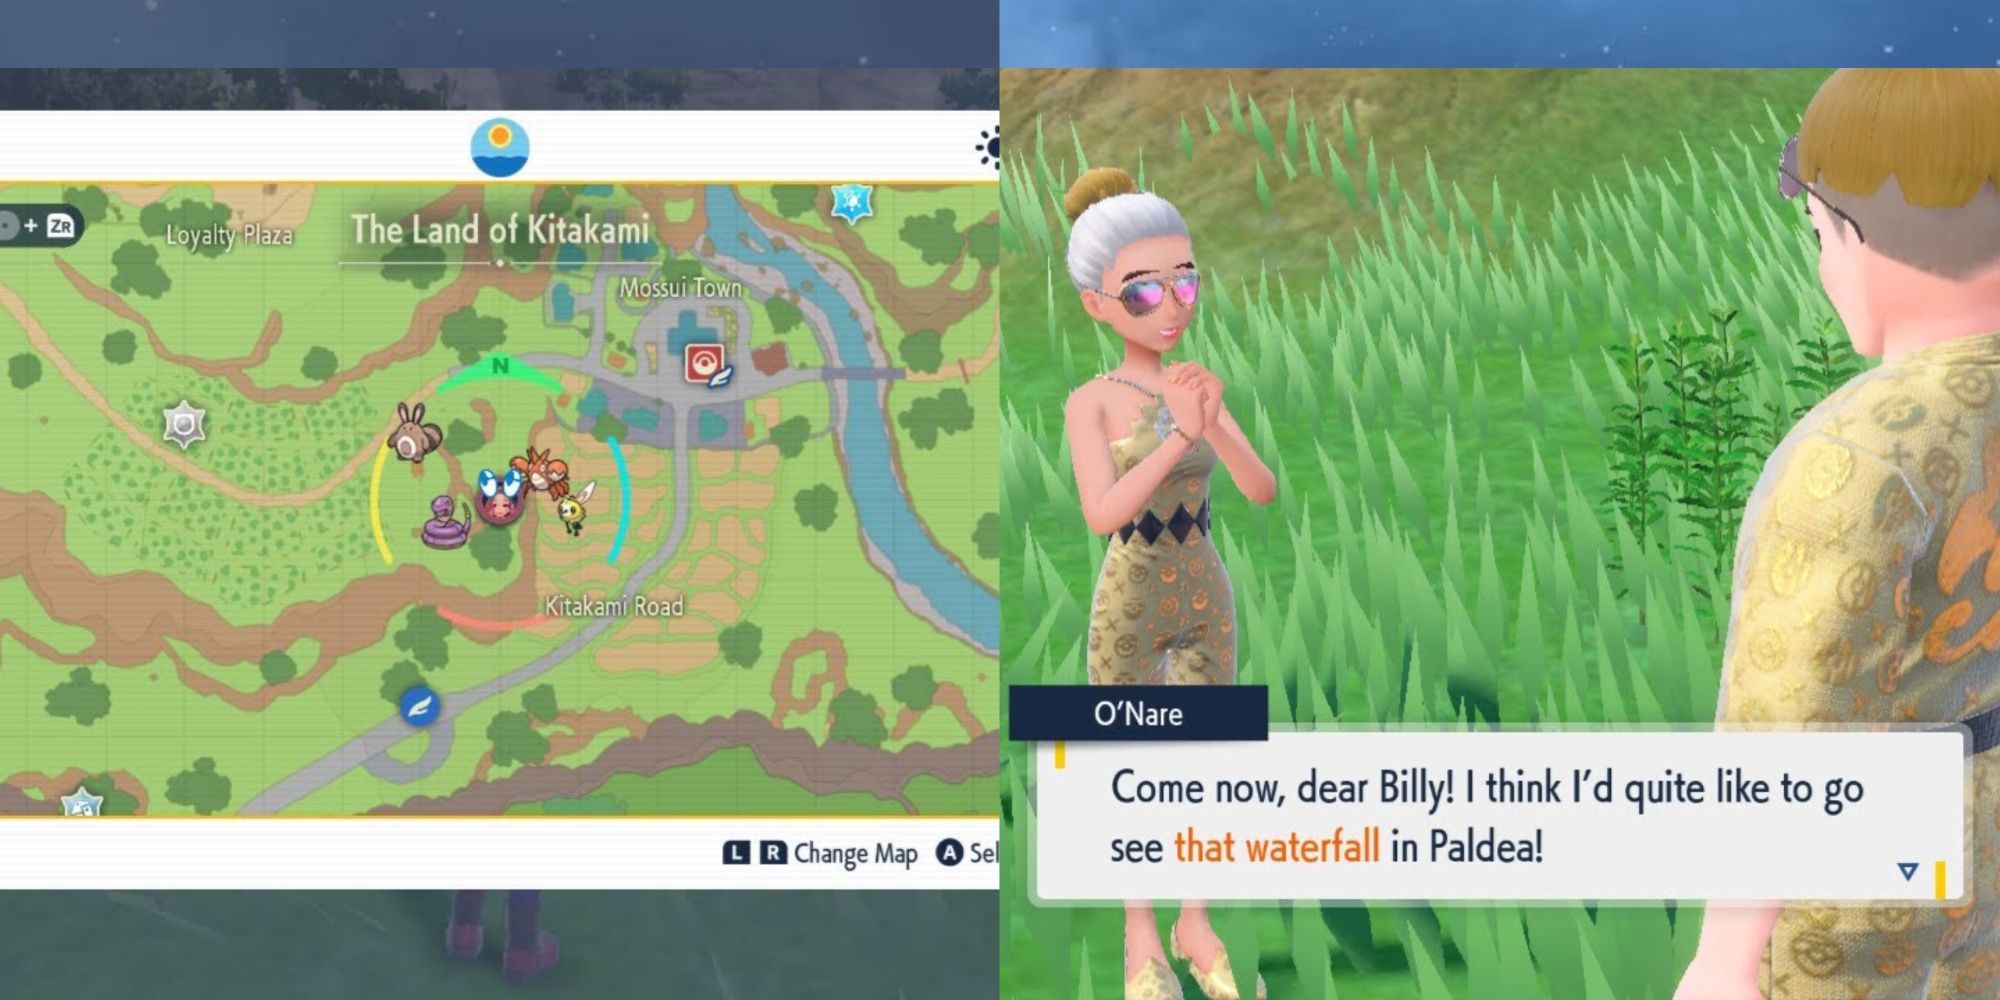 POkemon Scarlet Violet Glitterati Kitakami Location showing the in-game map and player besides Billy and O'Nare